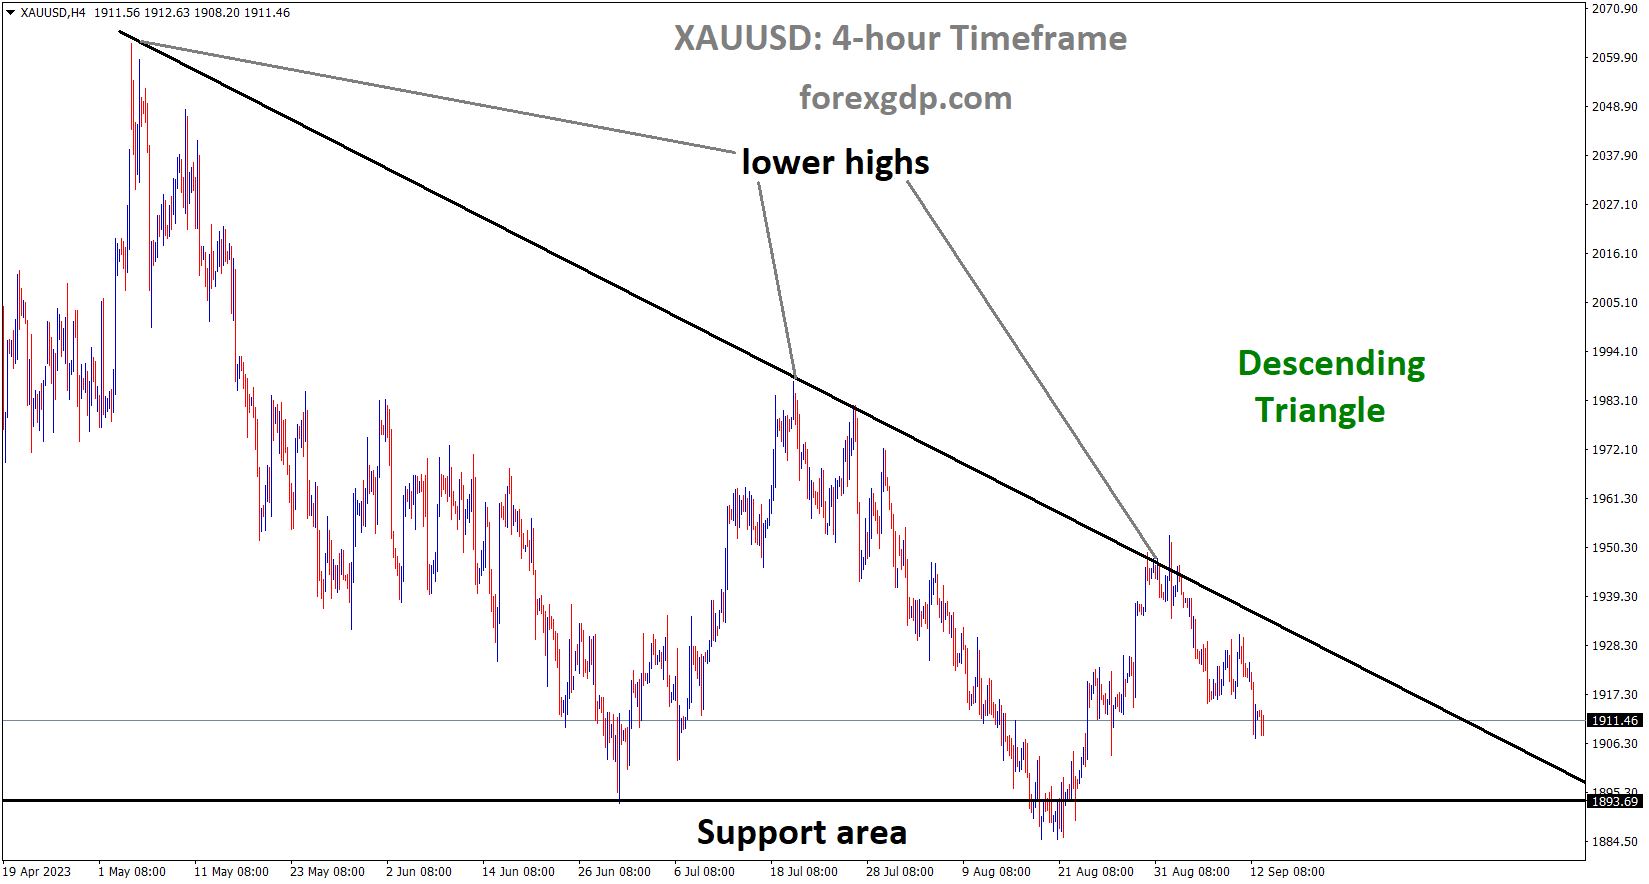 XAUUSD is moving in Descending Triangle and market has fallen from the lower high area of the channel